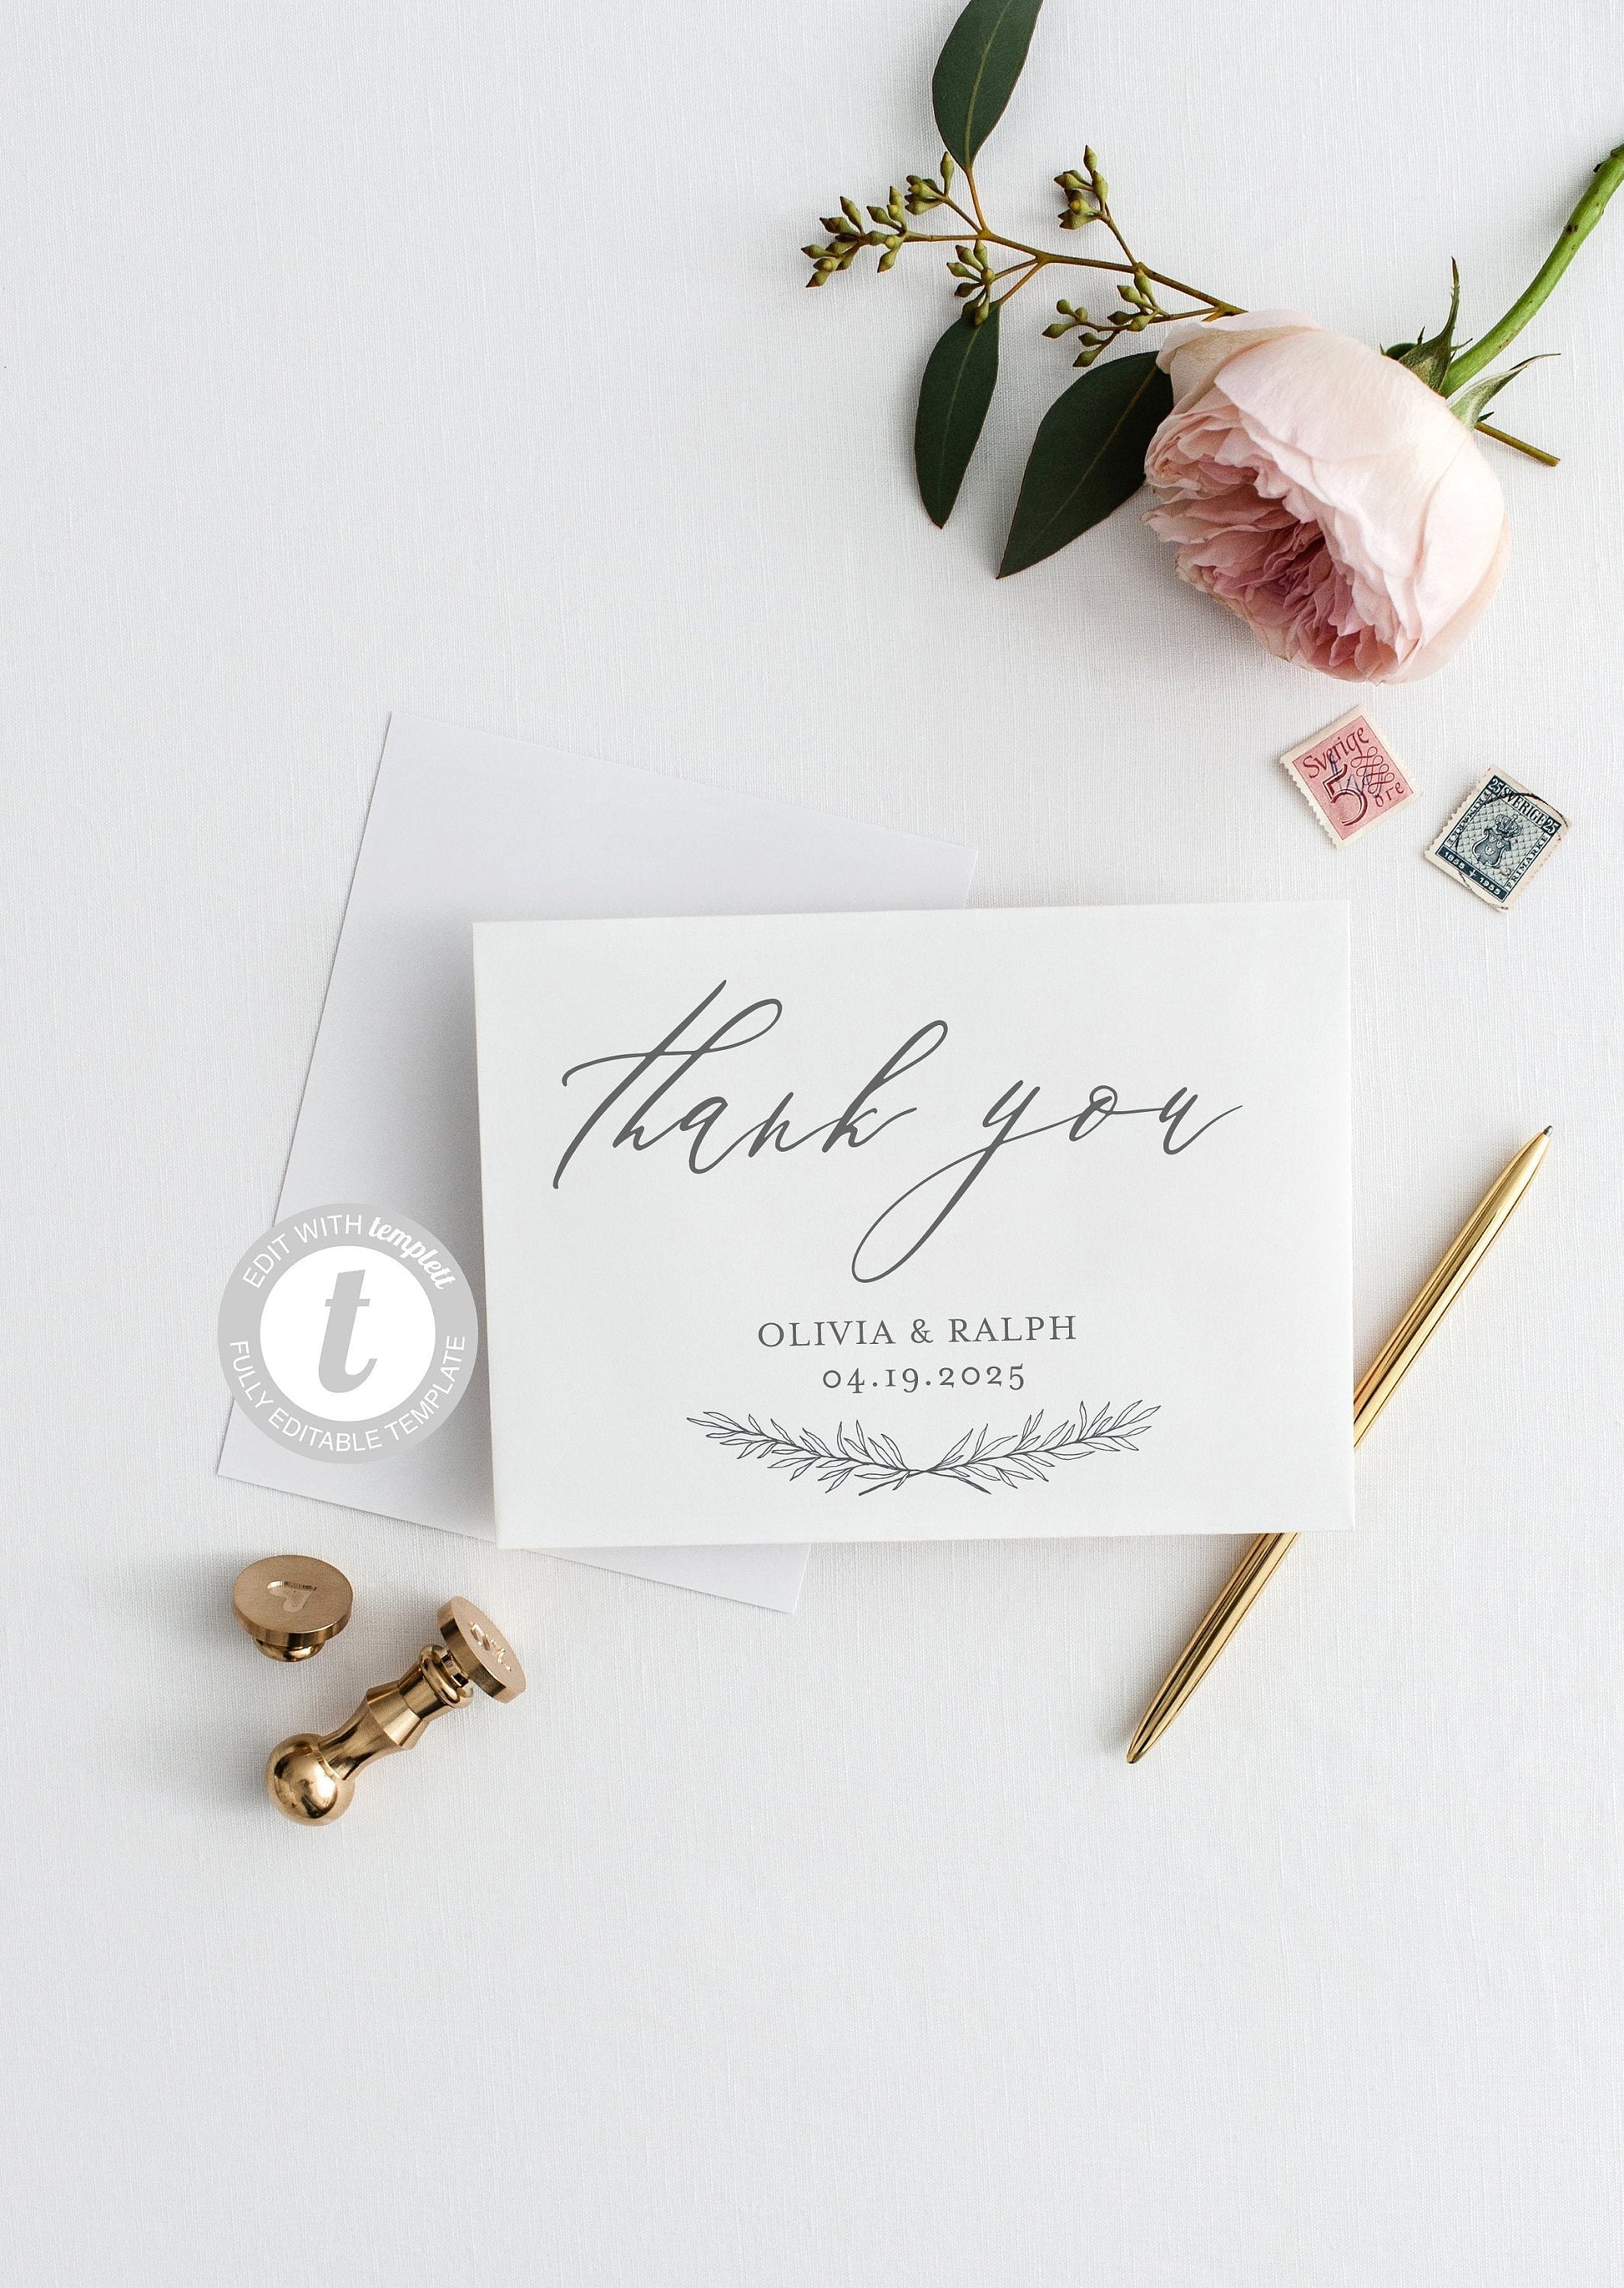 Elegant Wedding Thank You Card, Instant Download, Thank you Cards, Printable Thank You, Wedding Cards, Calligraphy, Rustic  - Olivia TAGS | TY | INSERTS SAVVY PAPER CO